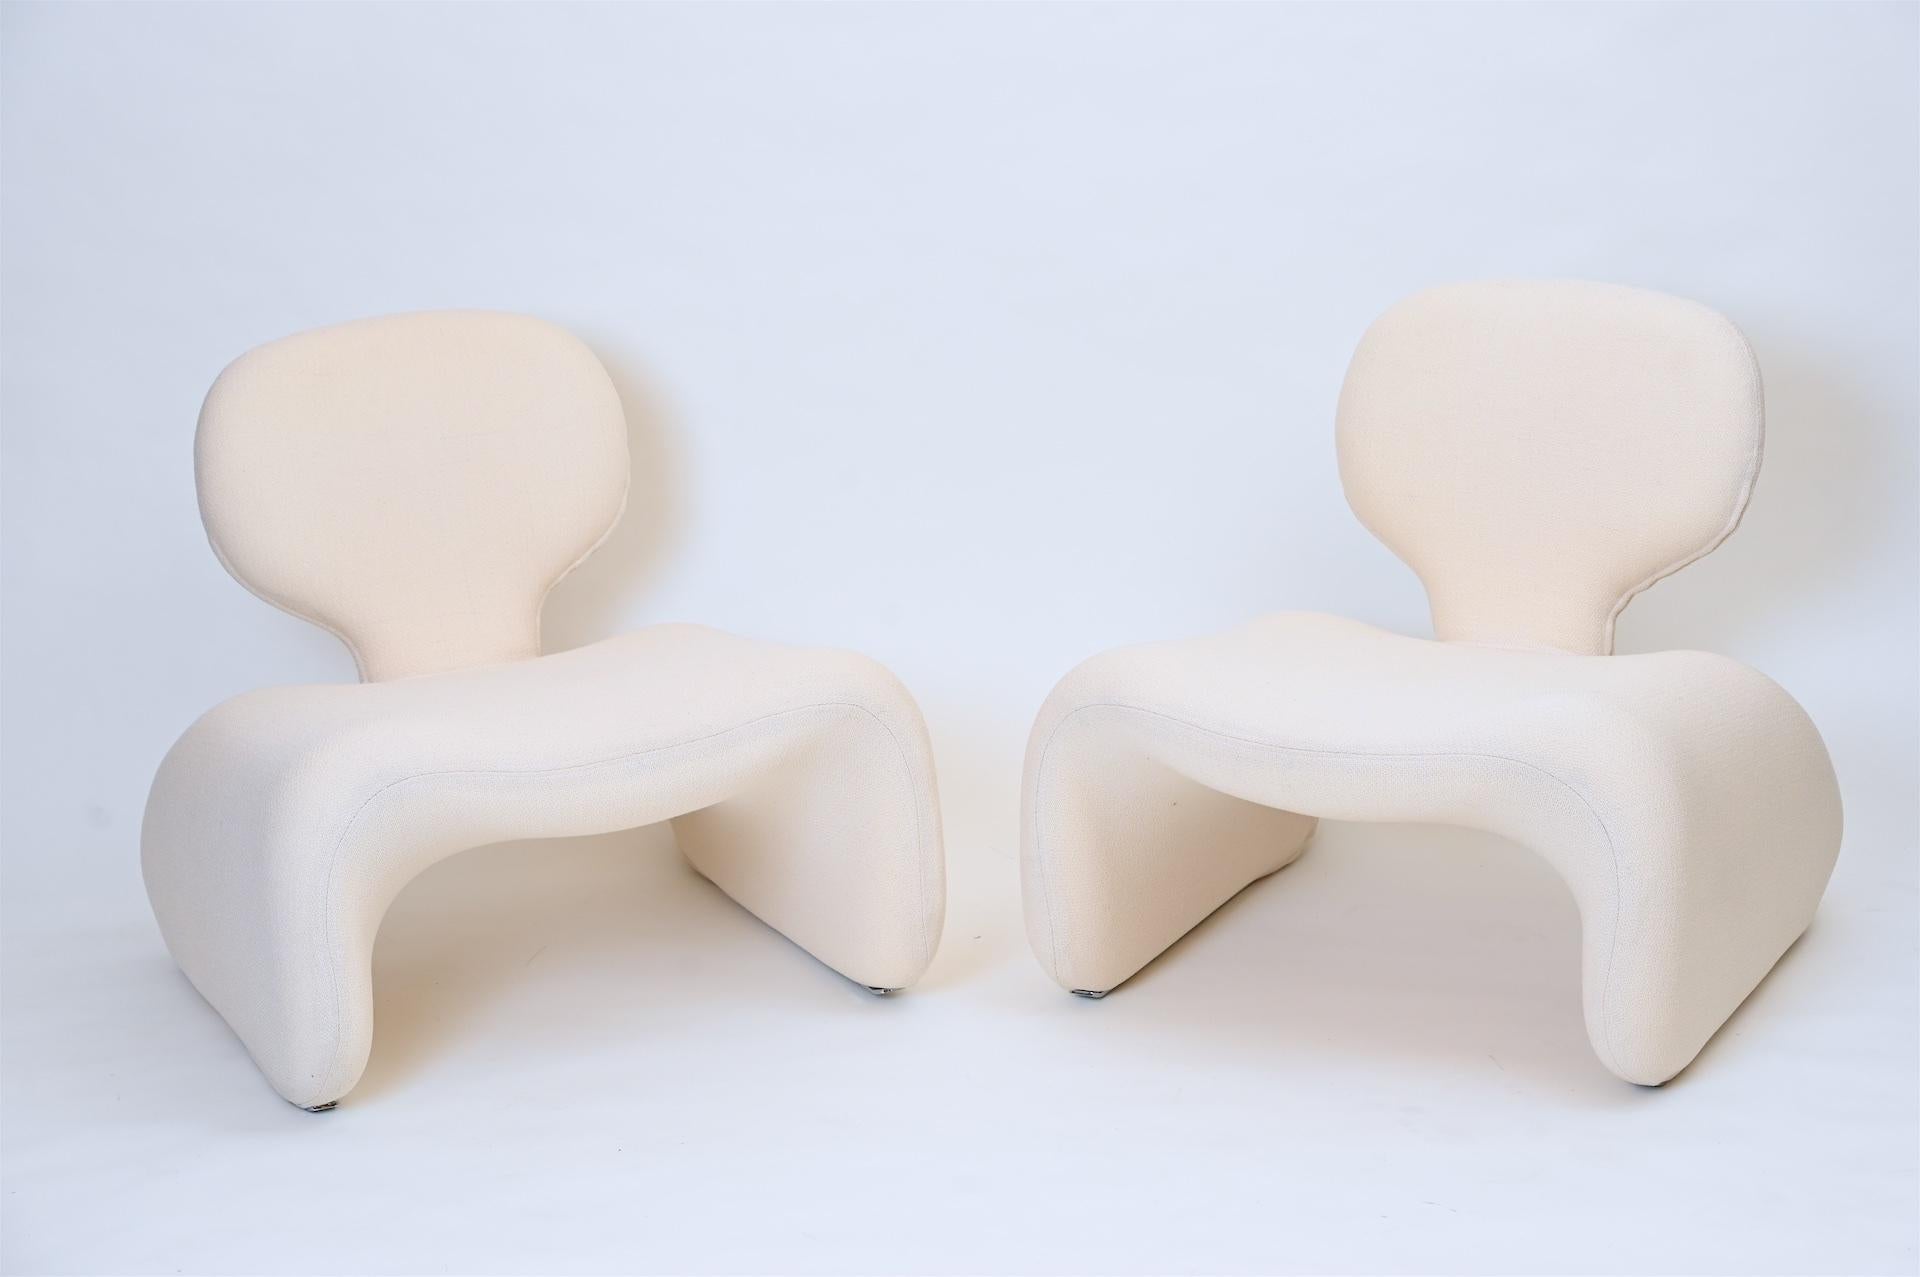 Fully restored Djinn chairs designed by French designer Olivier Mourgue for Airborne, France, circa 1965.

And reupholstered in an off-white stretch 100% wool mohair

These chairs from the original production which ran from 1965-1976

Made